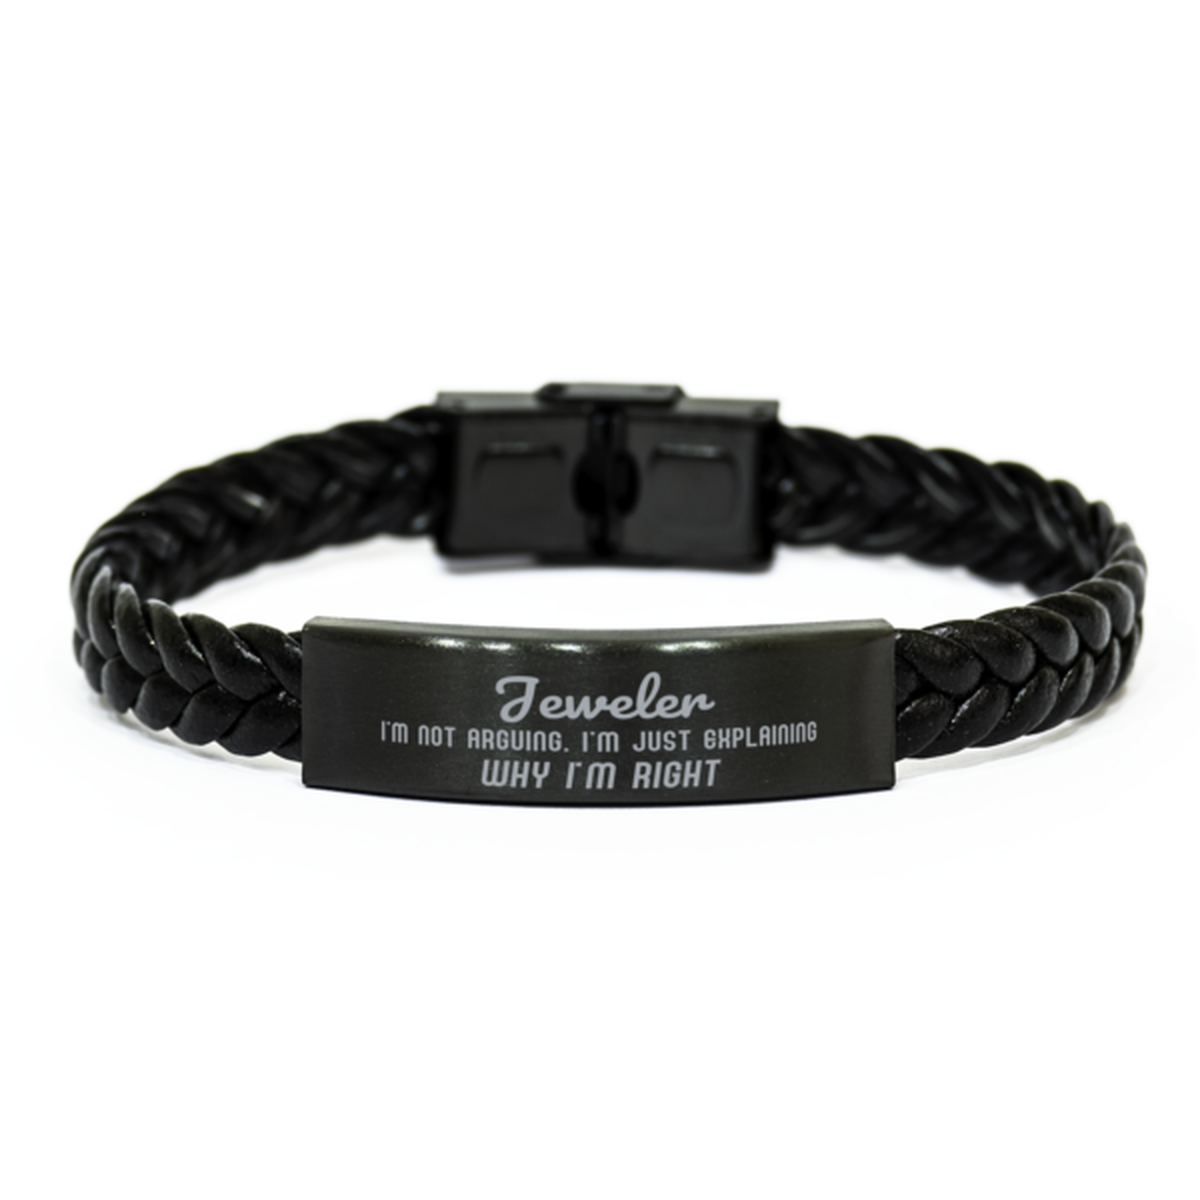 Jeweler I'm not Arguing. I'm Just Explaining Why I'm RIGHT Braided Leather Bracelet, Graduation Birthday Christmas Jeweler Gifts For Jeweler Funny Saying Quote Present for Men Women Coworker